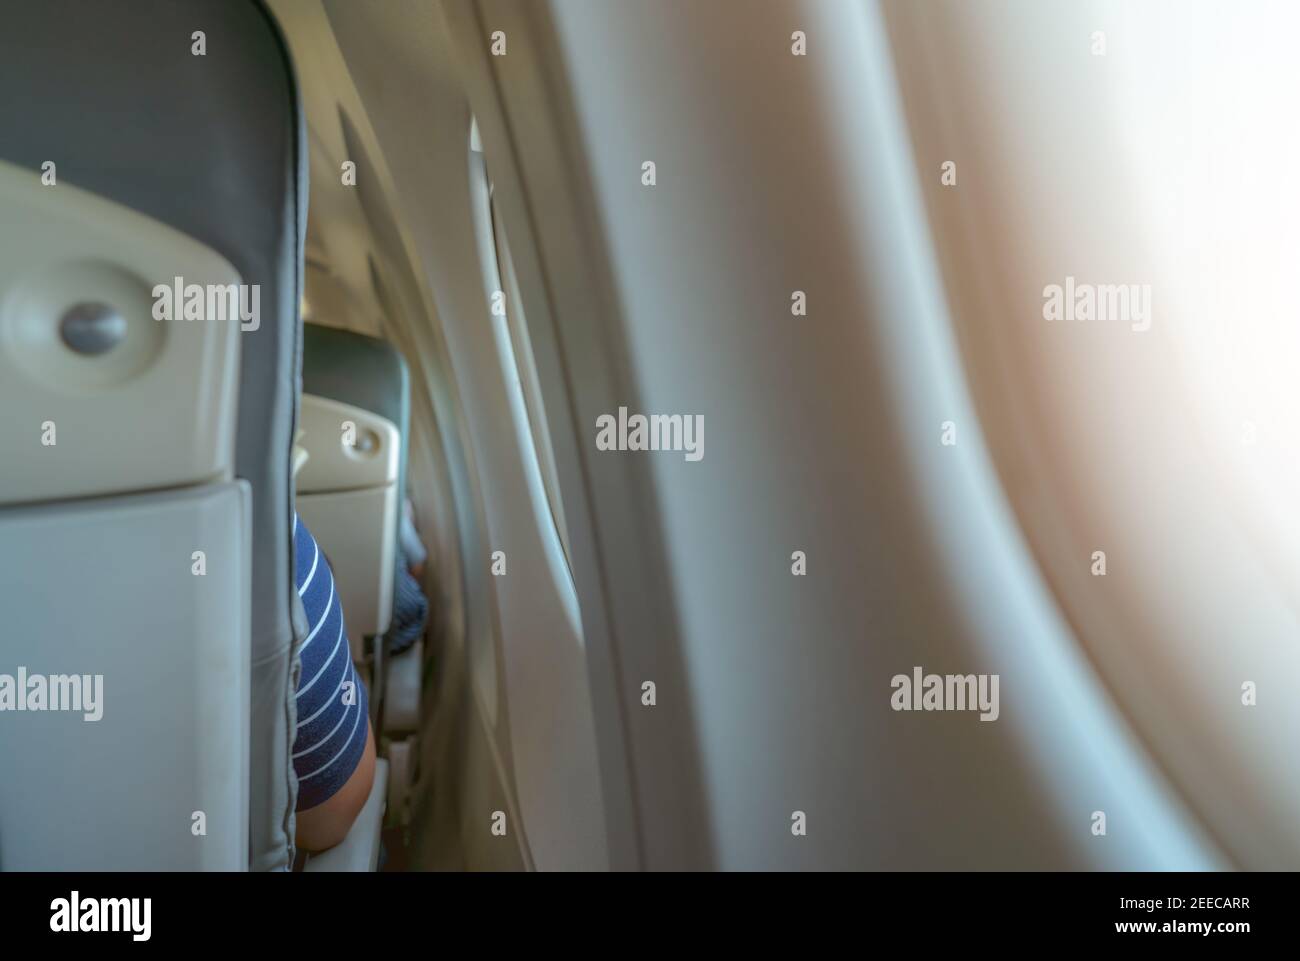 Rearview of airplane seat near plane window. Economy class airplane. Inside of commercial airline. Small space between passenger economy seat. Stock Photo